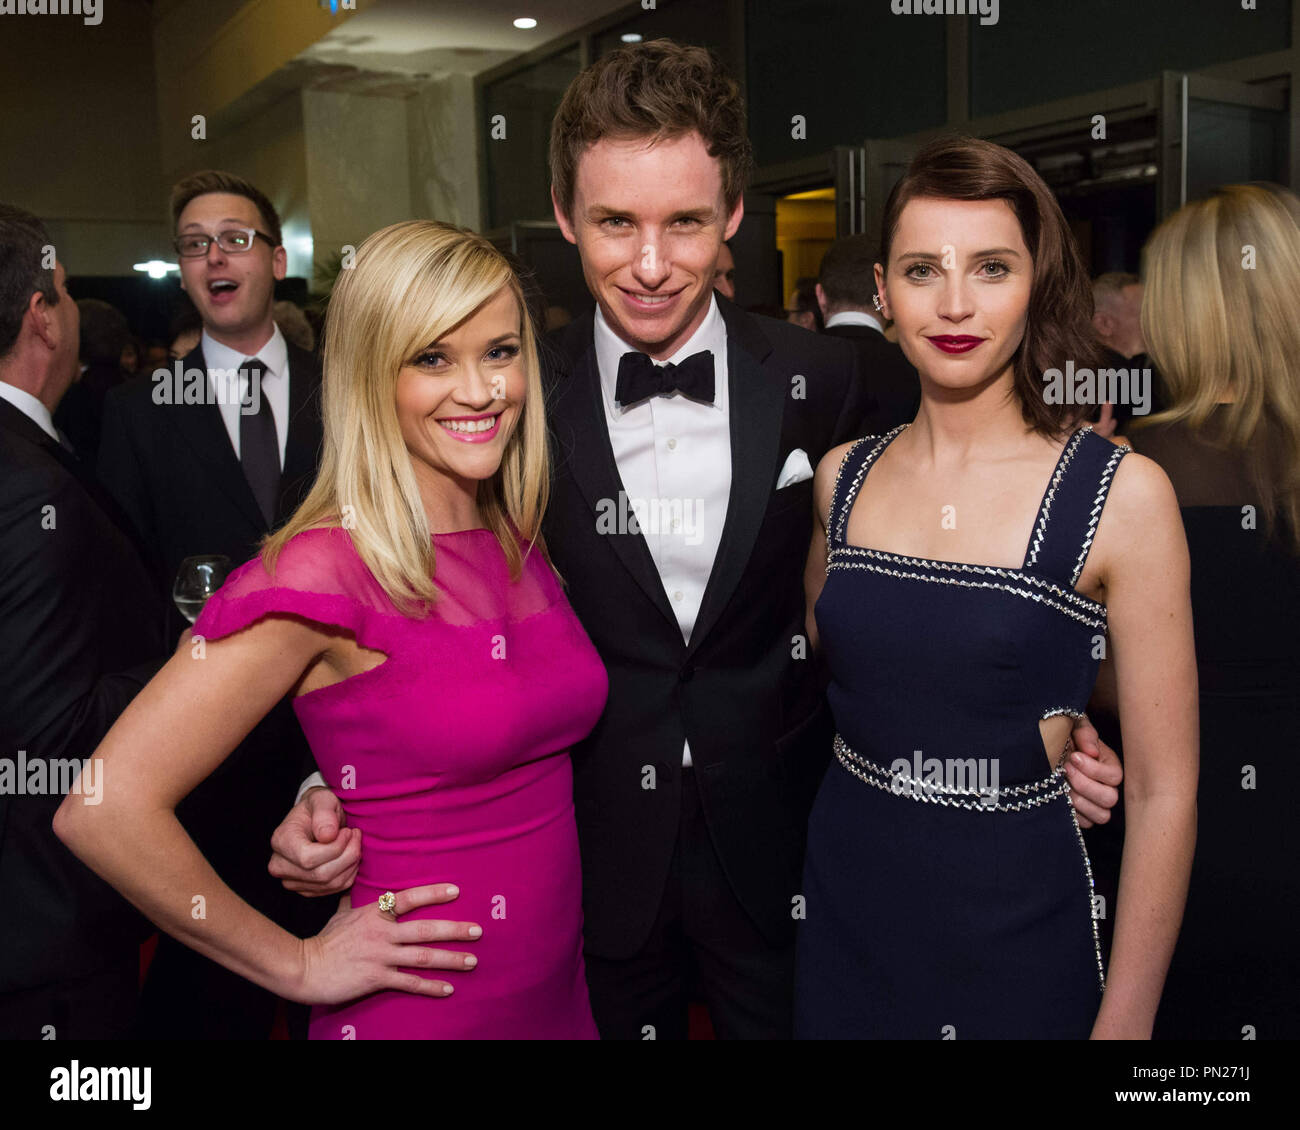 Reese Witherspoon (left), Eddie Redmayne (center) and Felicity Jones  attend the 6th Annual Governors Awards in The Ray Dolby Ballroom at Hollywood & Highland Center® in Hollywood, CA, on Saturday, November 8, 2014.  File Reference # 32487 024THA  For Editorial Use Only -  All Rights Reserved Stock Photo